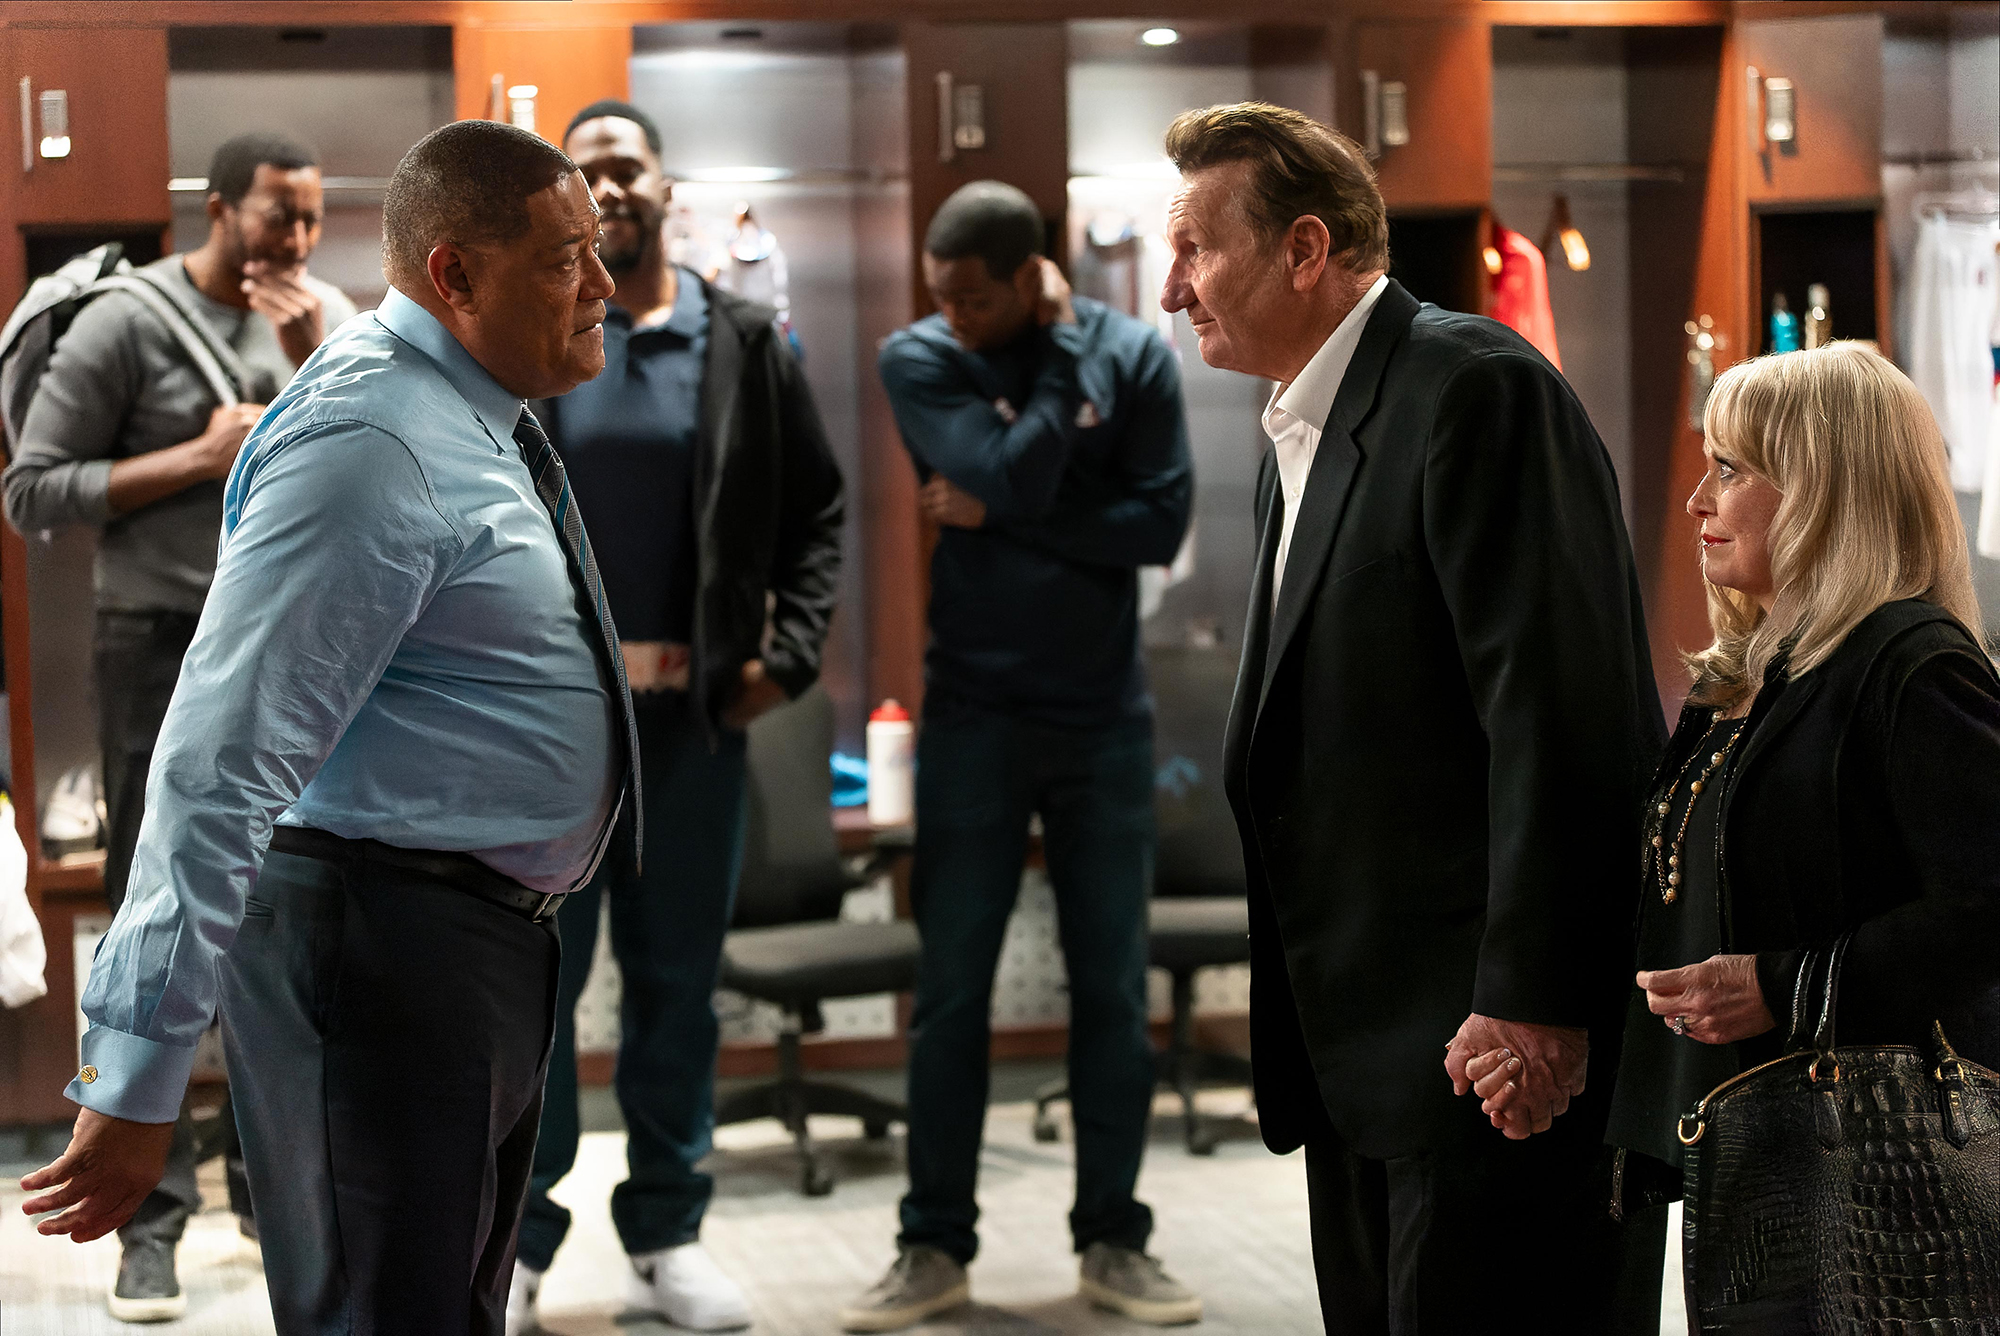 image from the FX/Hulu series "Clipped." From left to right in this scene within an NBA locker room are Laurence Fishburne as Coach Doc Rivers, Ed O'Neill as LA Clippers owner Don Sterling and Jacki Weaver as Shelly Sterling